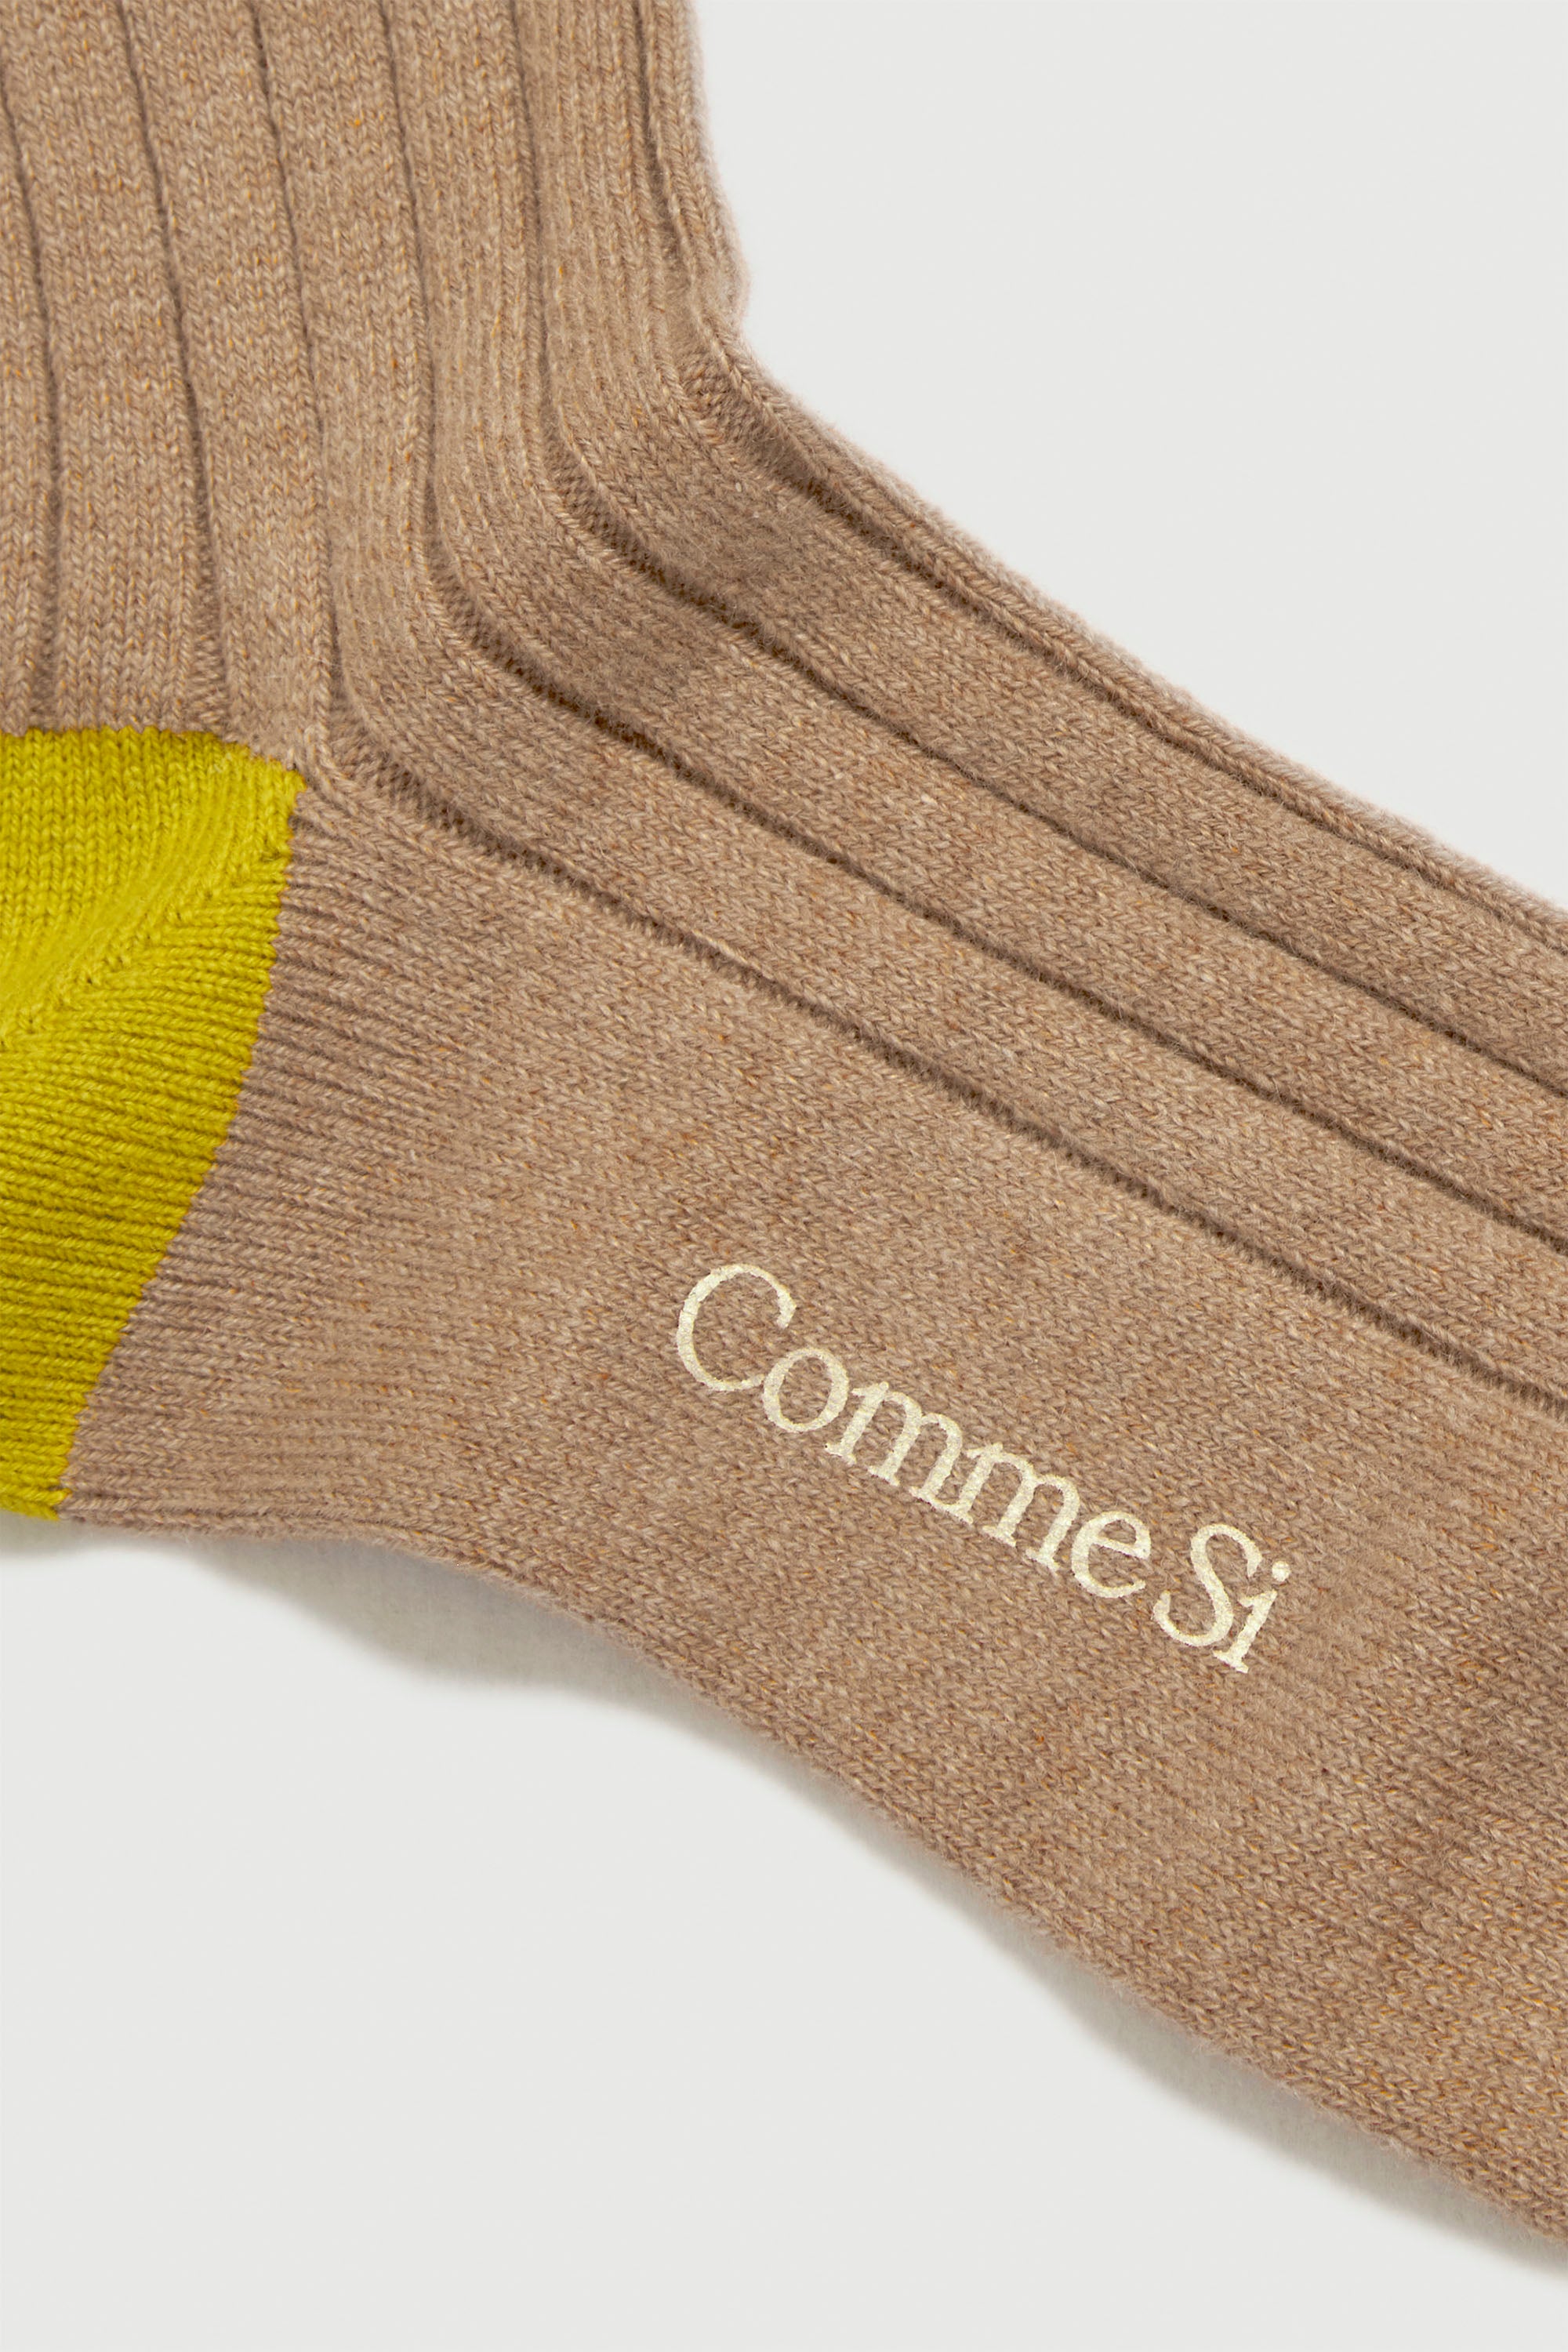 Footbed detail, The Danielle Sock, The Cashmere Trio in Camel Color Block, Mongolian cashmere socks, by Comme Si